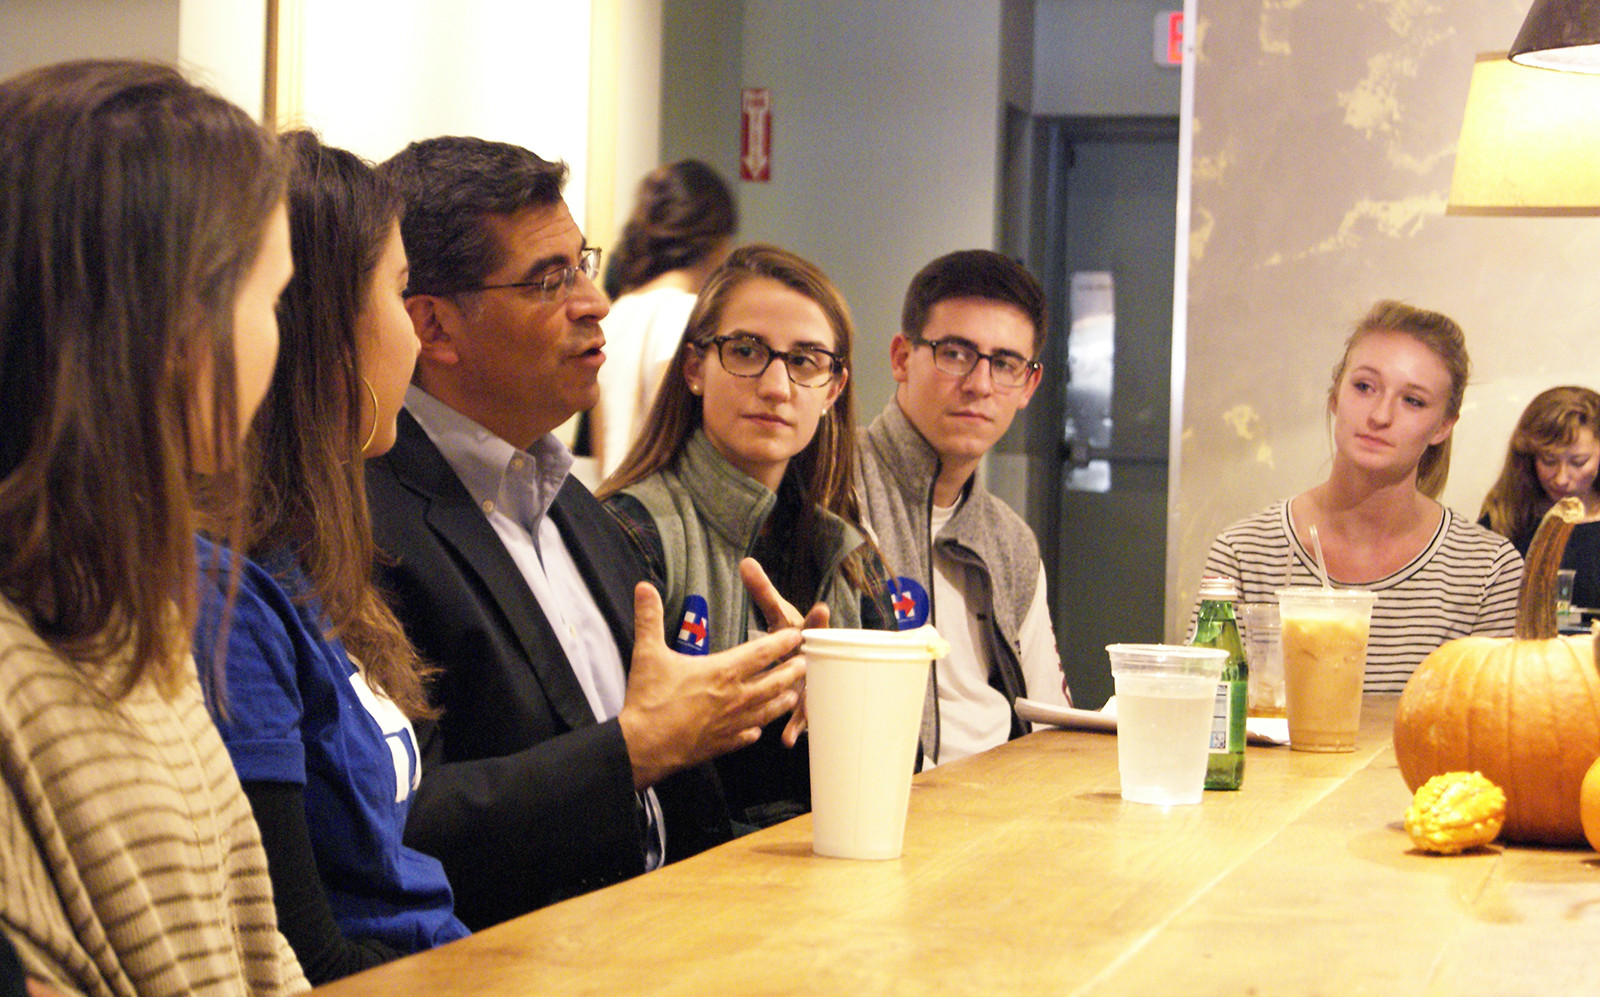 House Democratic Caucus Chairman Xavier Becerra speaks to Boston University students at a Students for Hillary event at Pavement Coffee House on Monday. PHOTO BY JAKE FRIEDLAND/DAILY FREE PRESS STAFF